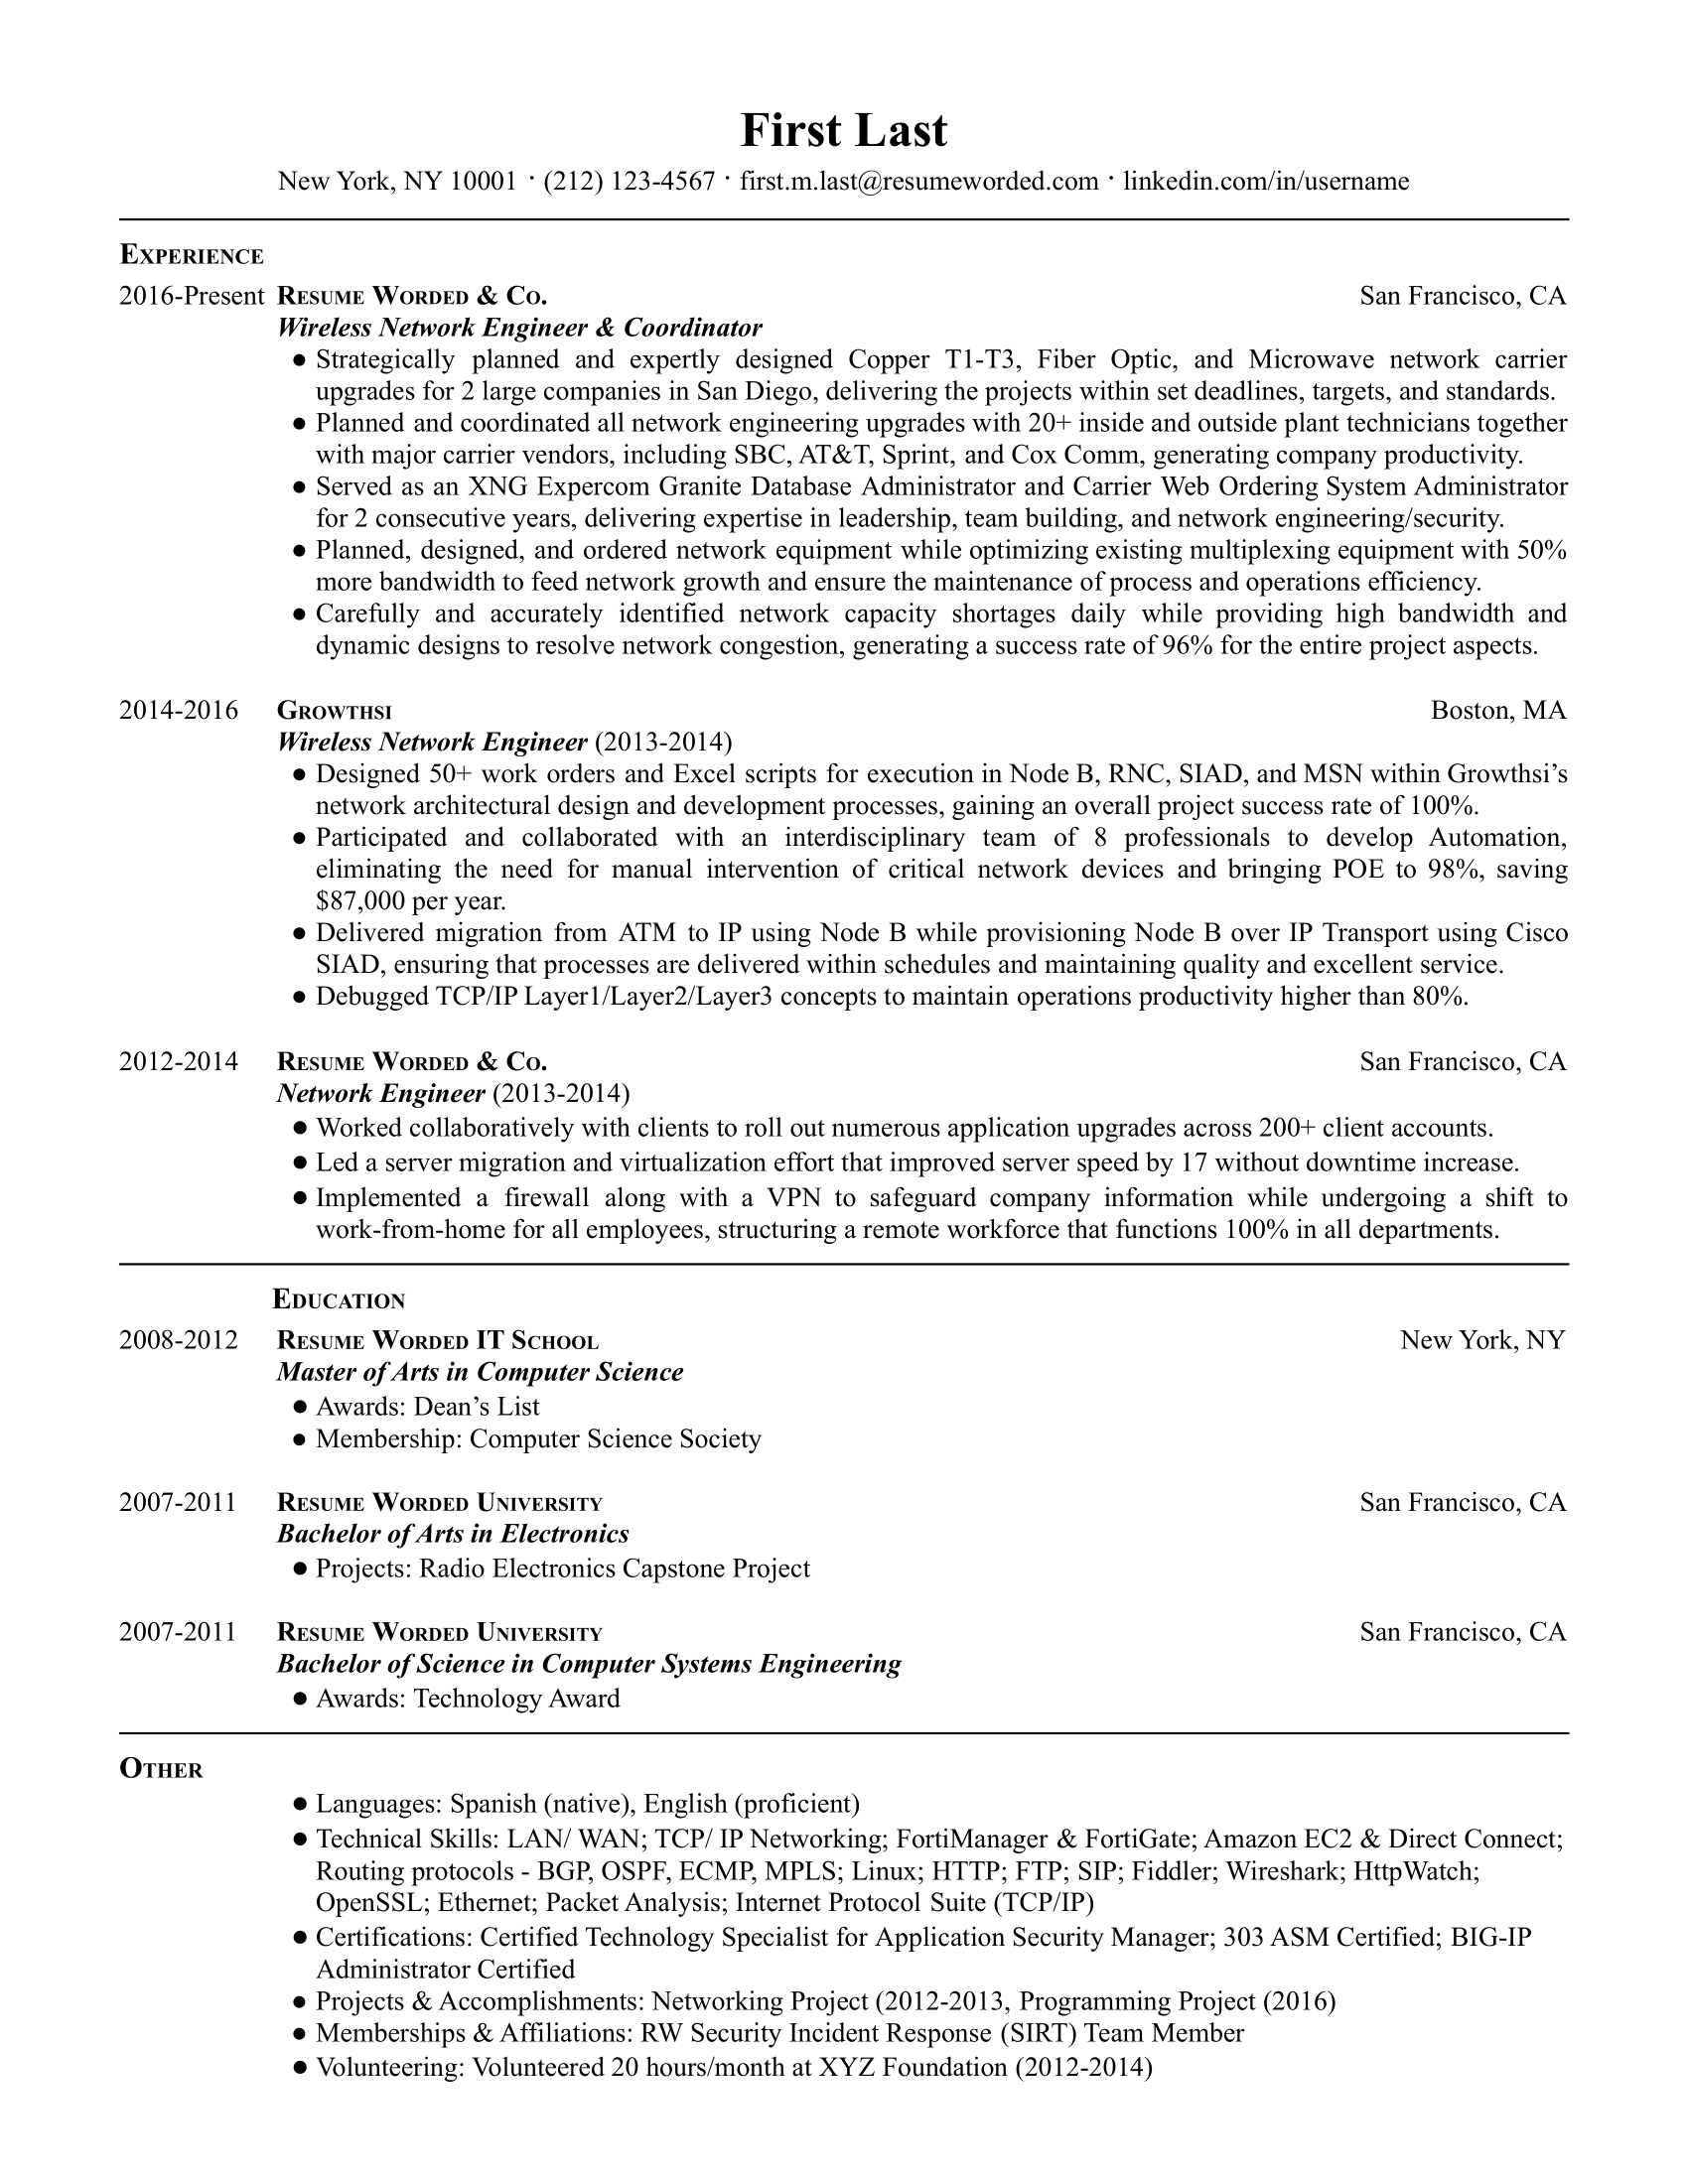 Wireless network engineer resume with continuing education, skills section, and relevant work experience